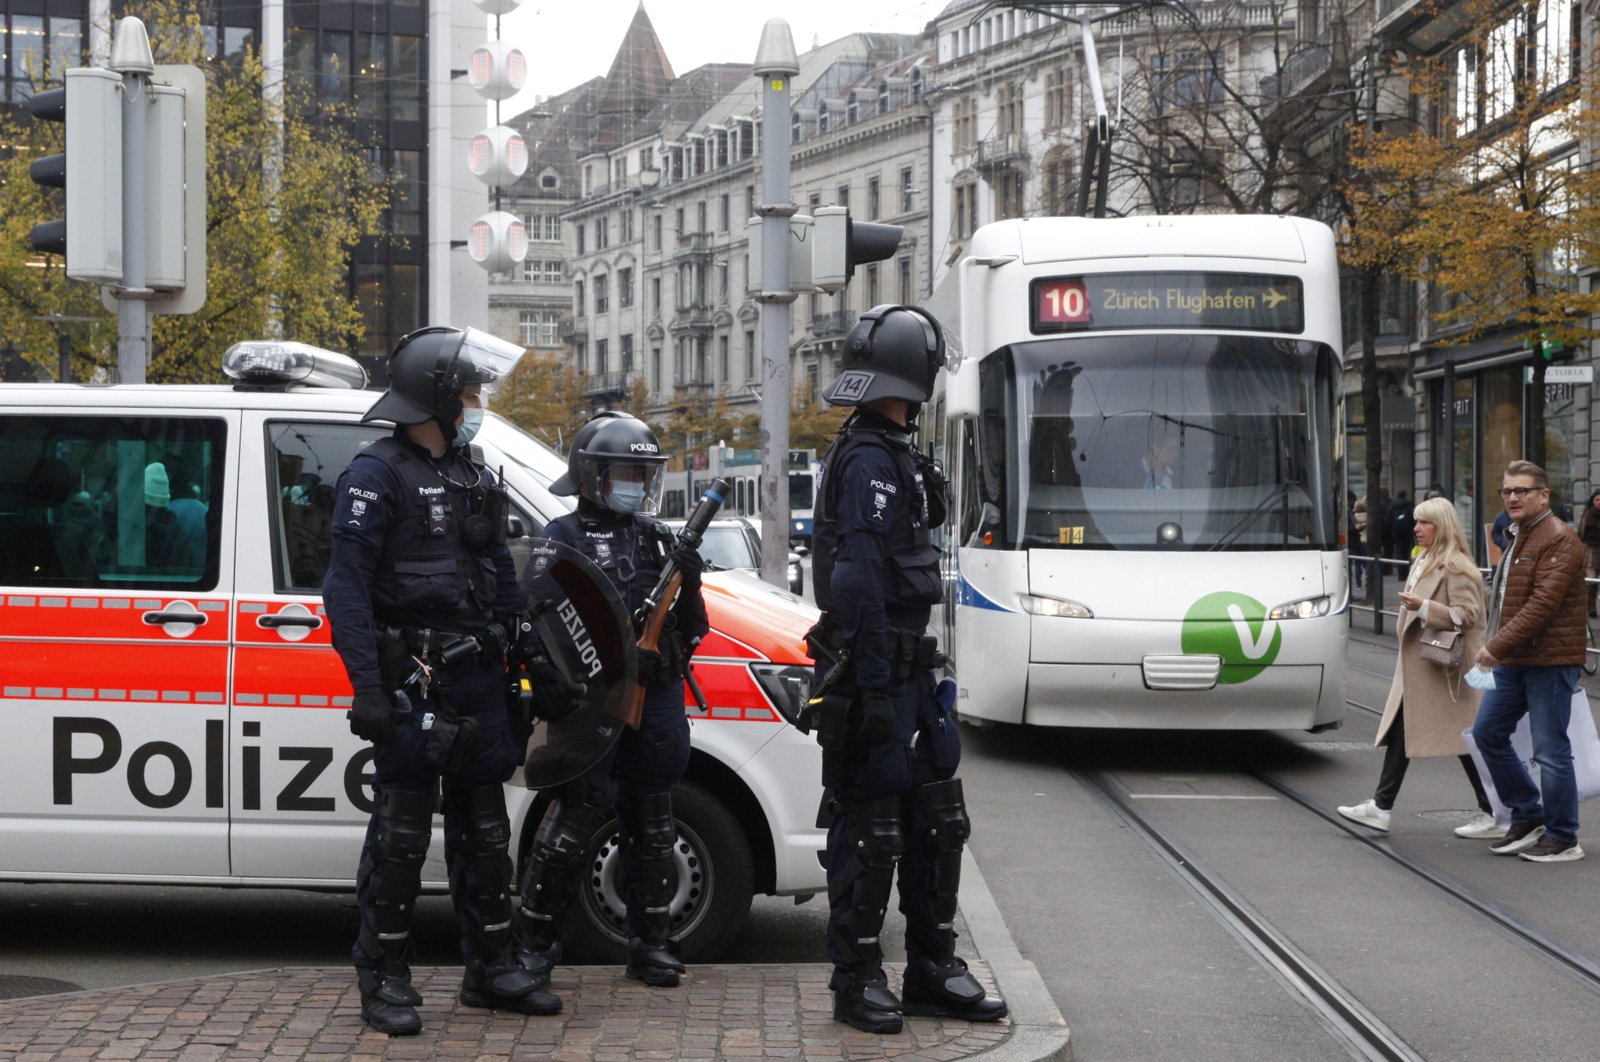 Swiss police officers stand guard during an unauthorized demonstration against COVID-19 restrictions at the Bahnhofstrasse shopping street in Zurich, Switzerland, Oct. 30, 2021. (Reuters File Photo)